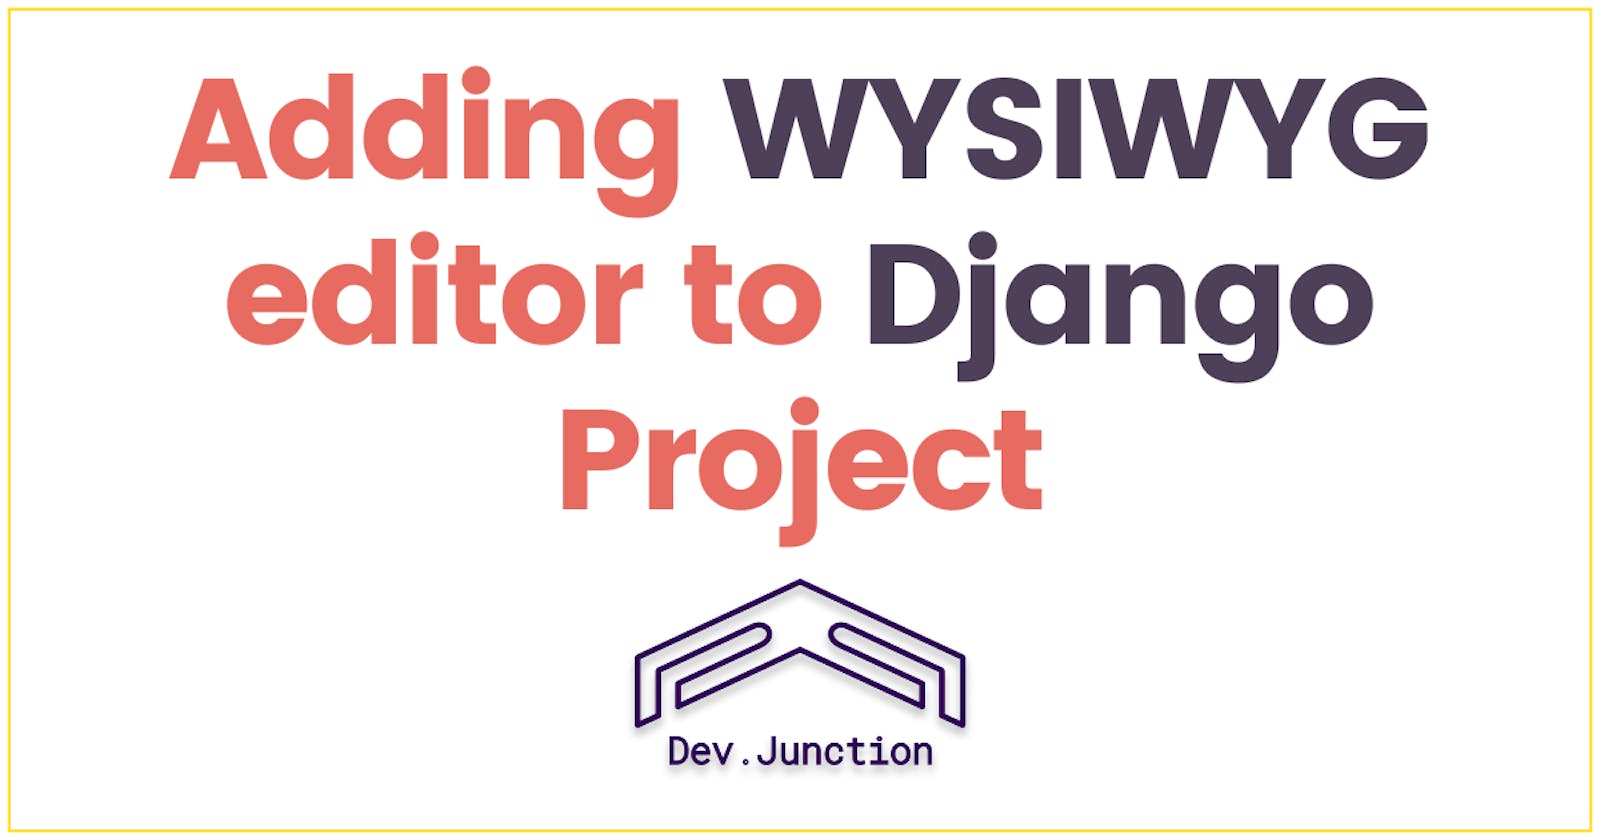 How to add WYSIWYG (What You See Is What You Get) editor to Django Project?